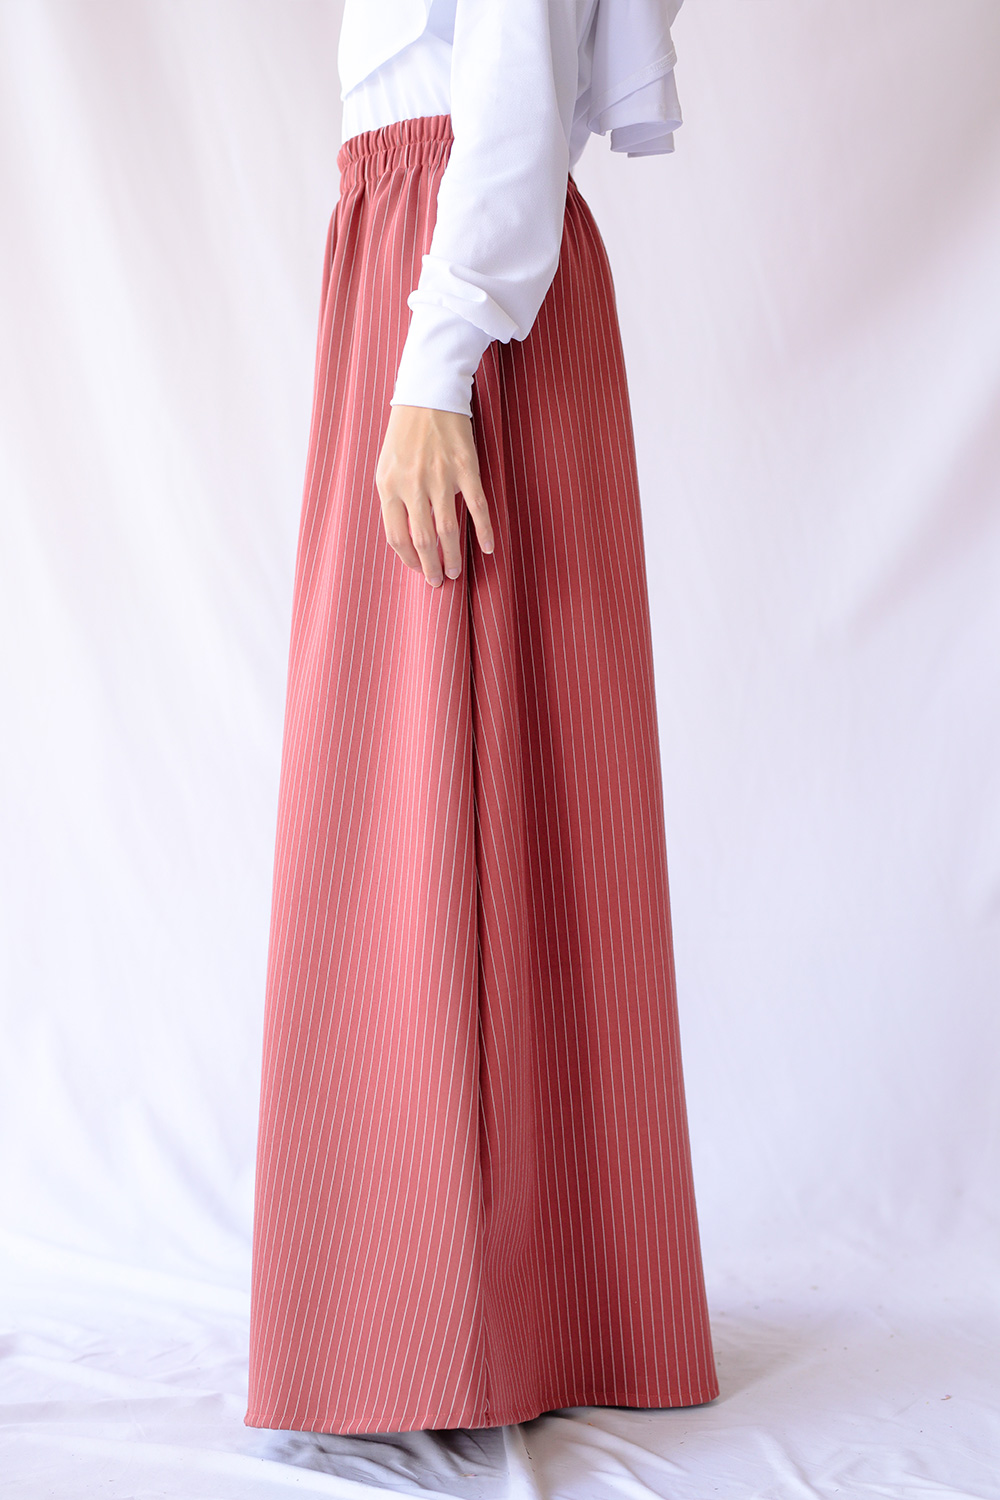 Line Skirt - Coral (Limited Edition)